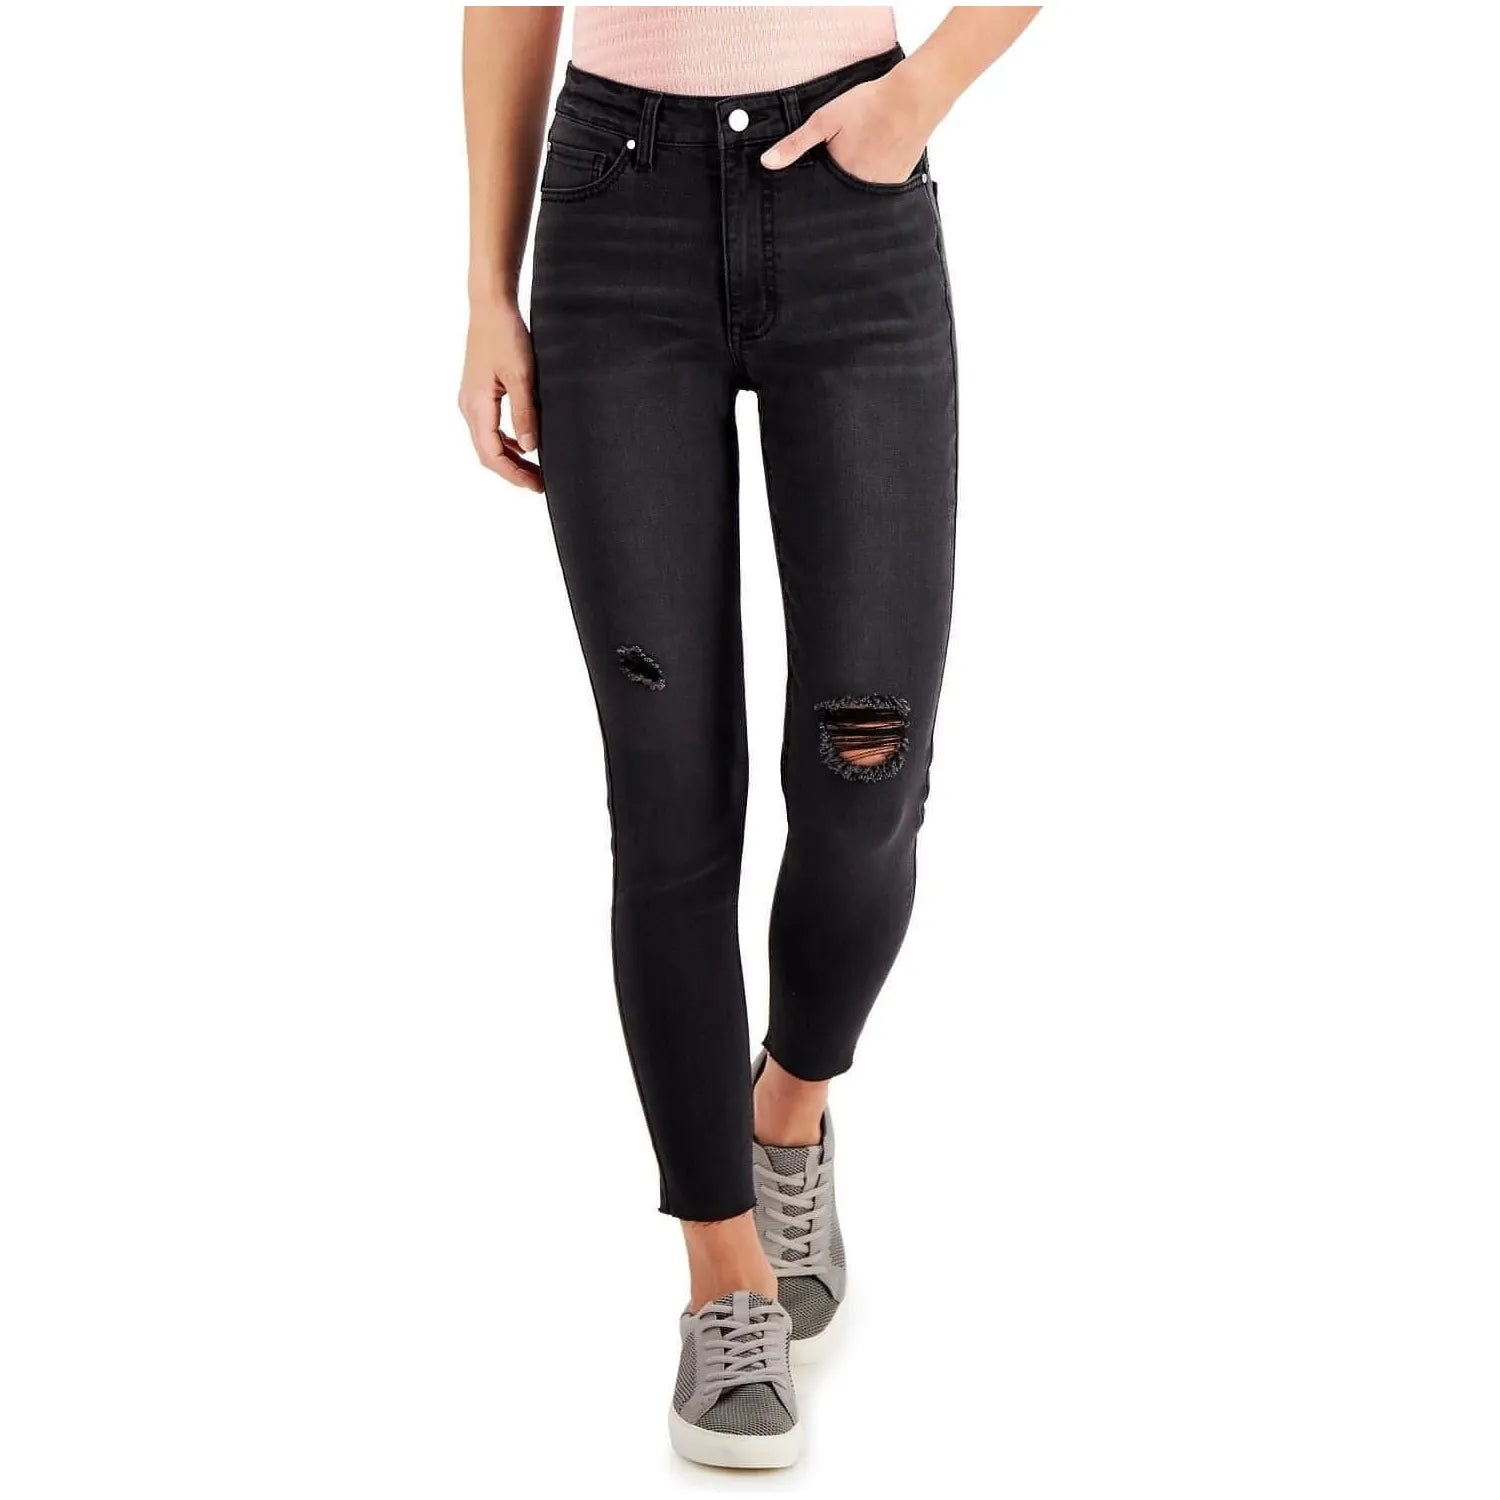 Tinseltown High Rise Skinny Jeans, Black, Size: 11 - Brandat Outlet